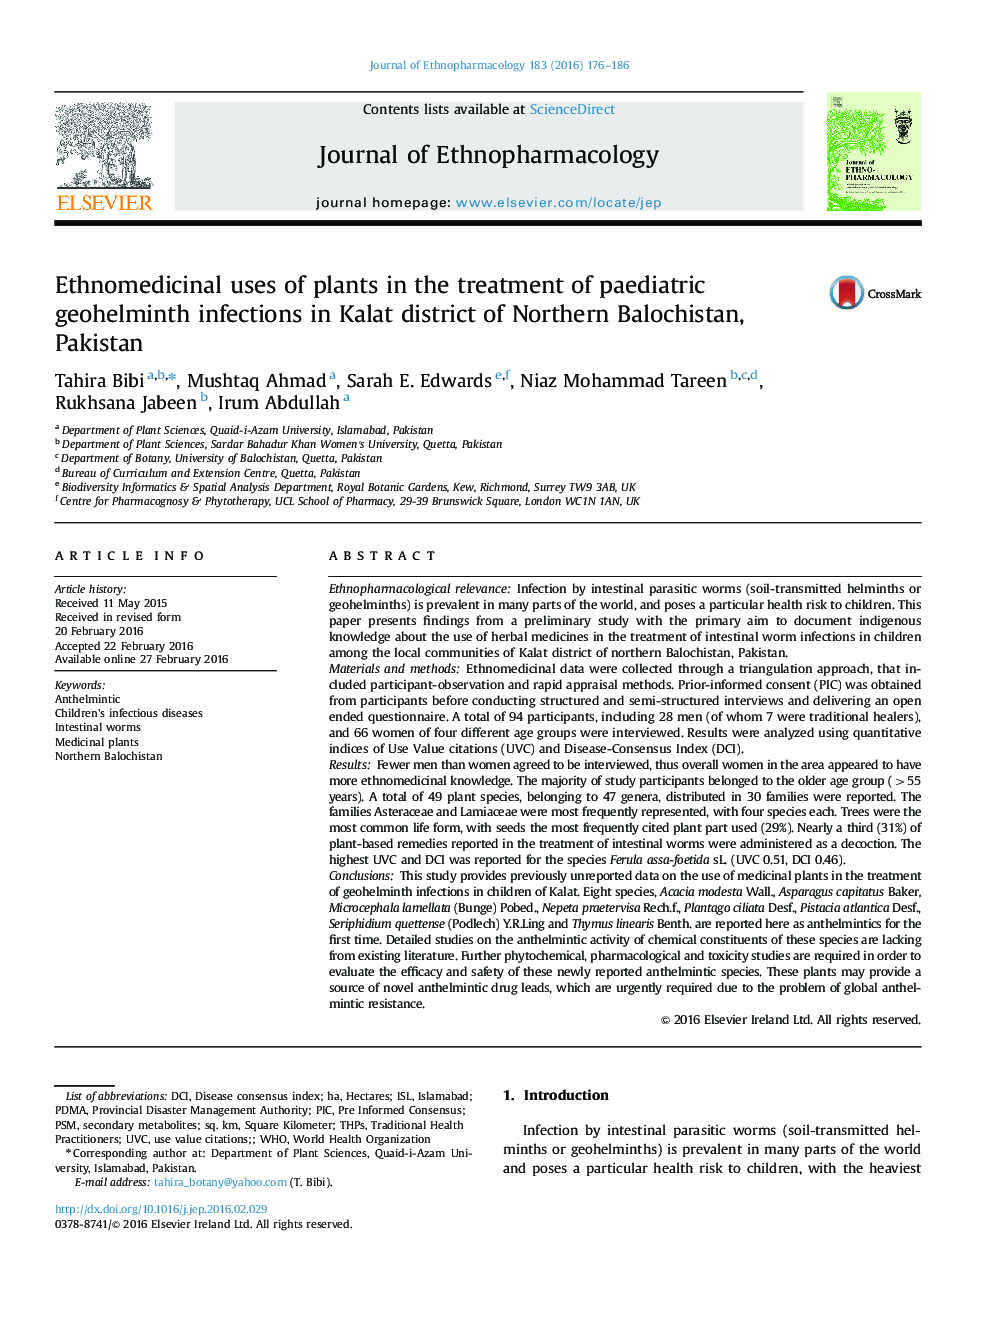 Ethnomedicinal uses of plants in the treatment of paediatric geohelminth infections in Kalat district of Northern Balochistan, Pakistan